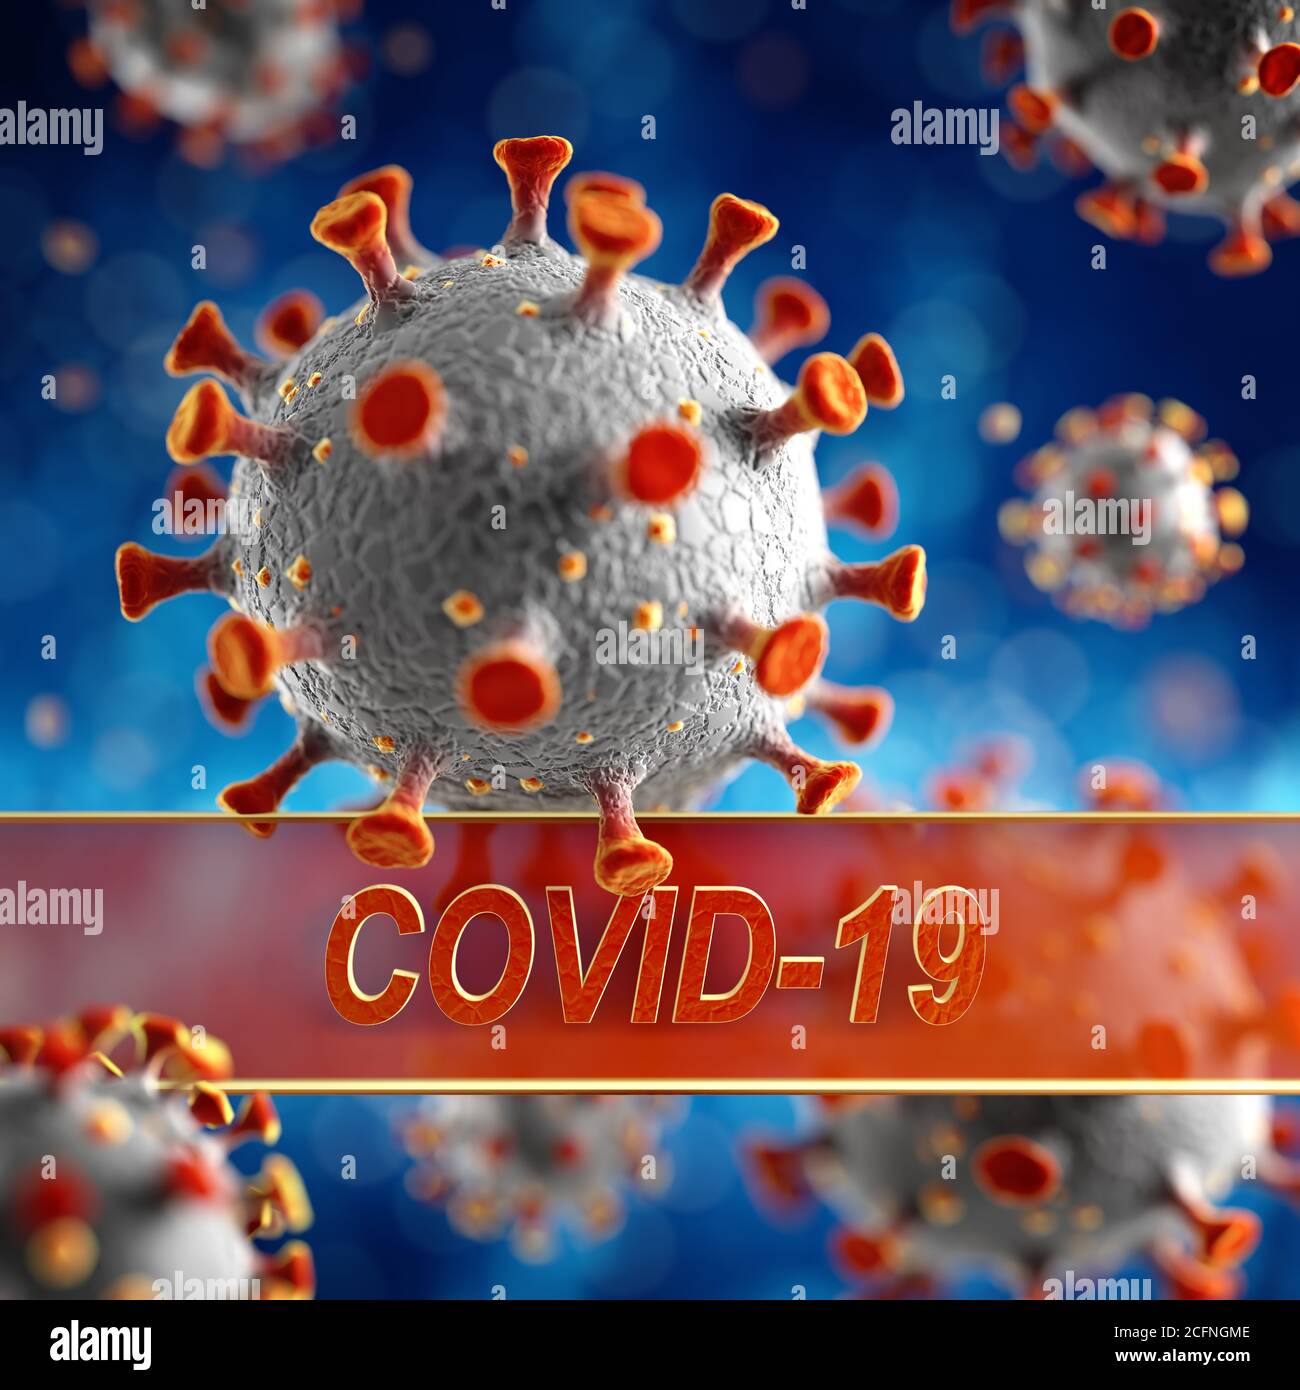 Novel Coronavirus, 2019-nCoV or SARS-CoV-2, cause of the global flu pandemic. Microscopic virus close up concept with Covid-19 text. 3d rendering. Stock Photo